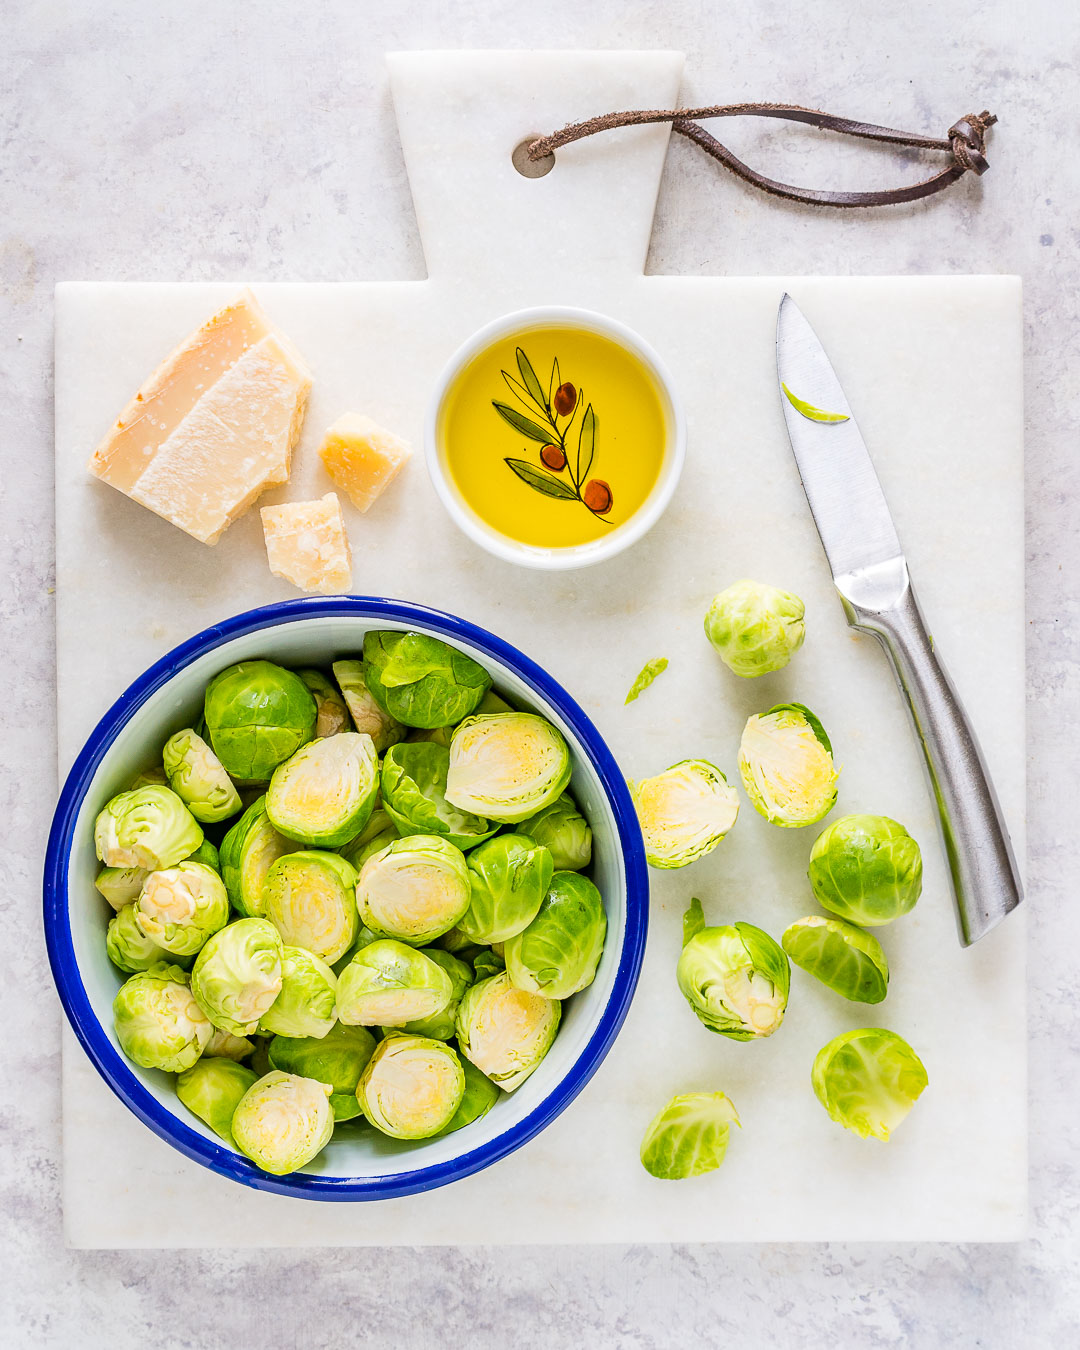 Roasted Brussels Sprouts Ingredients